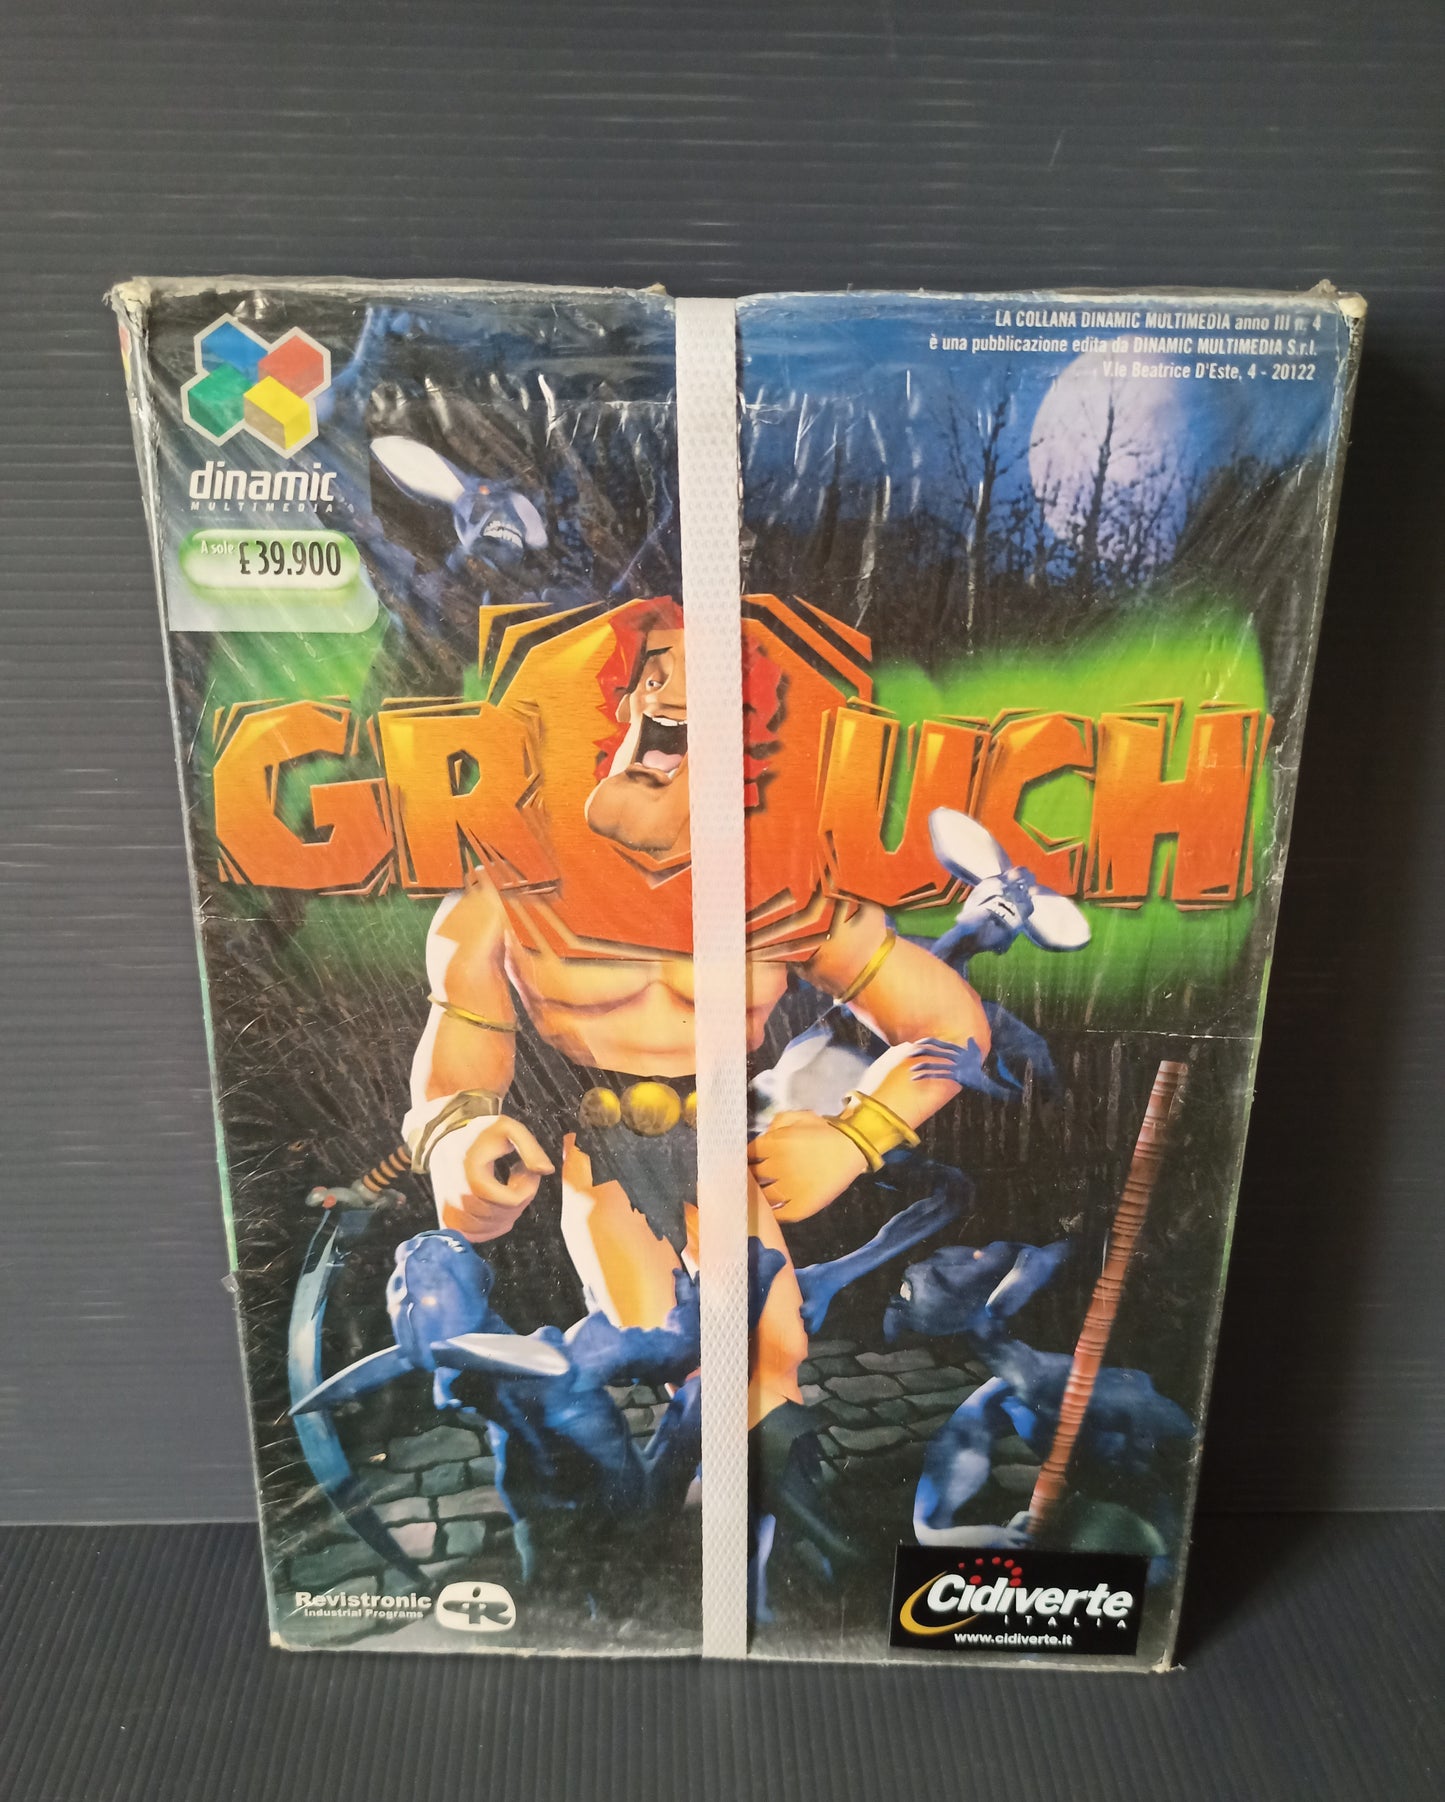 Grouch PC Video Game, Sealed